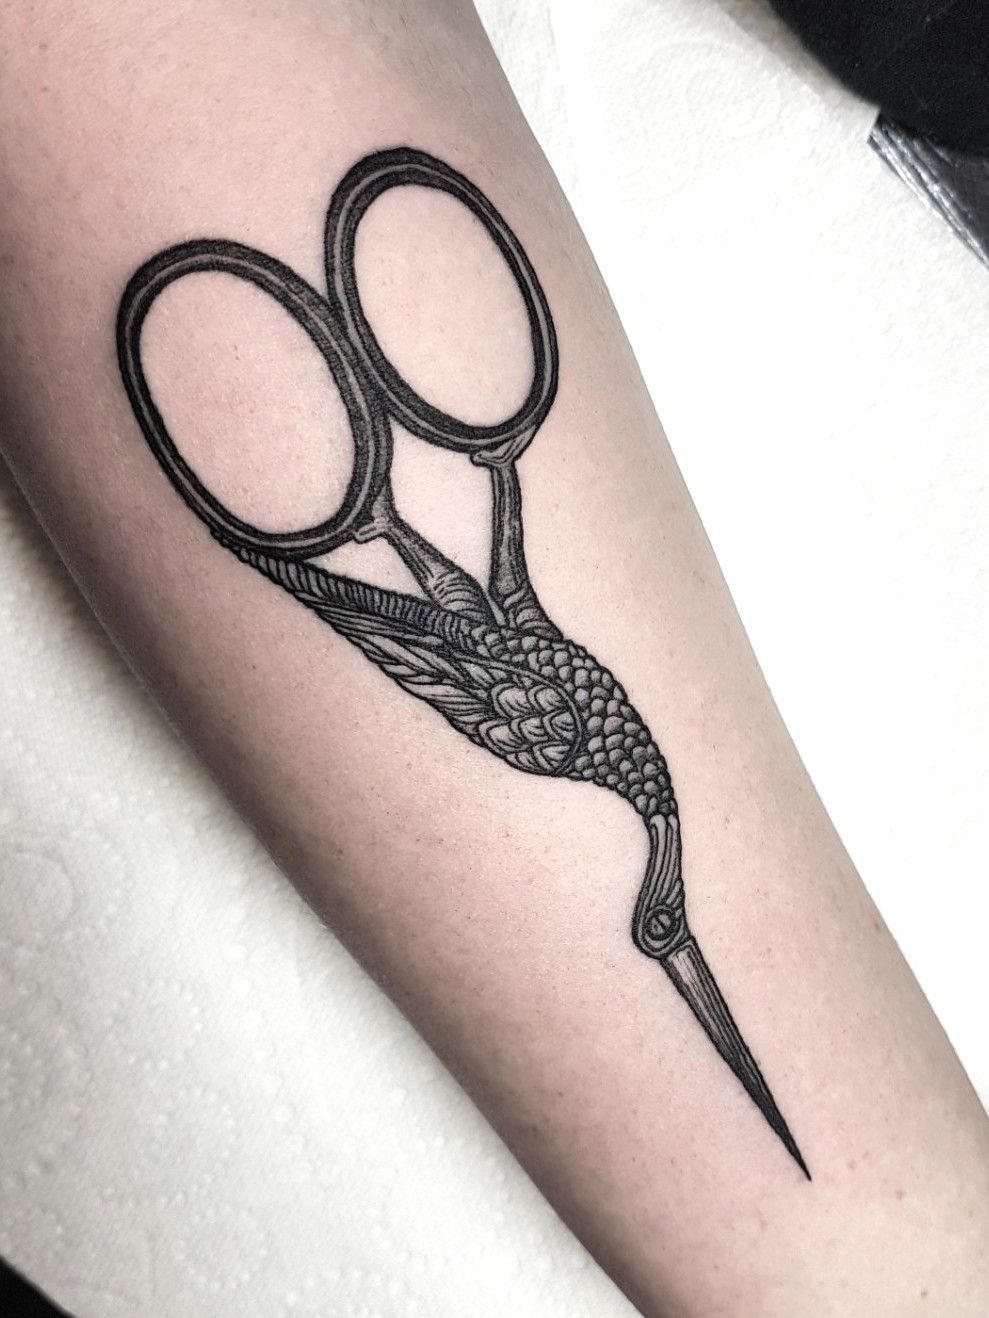 My Stork Scissors Tattoo maybe with a steelhead instead of stork  Scissors  tattoo Tattoos Body art